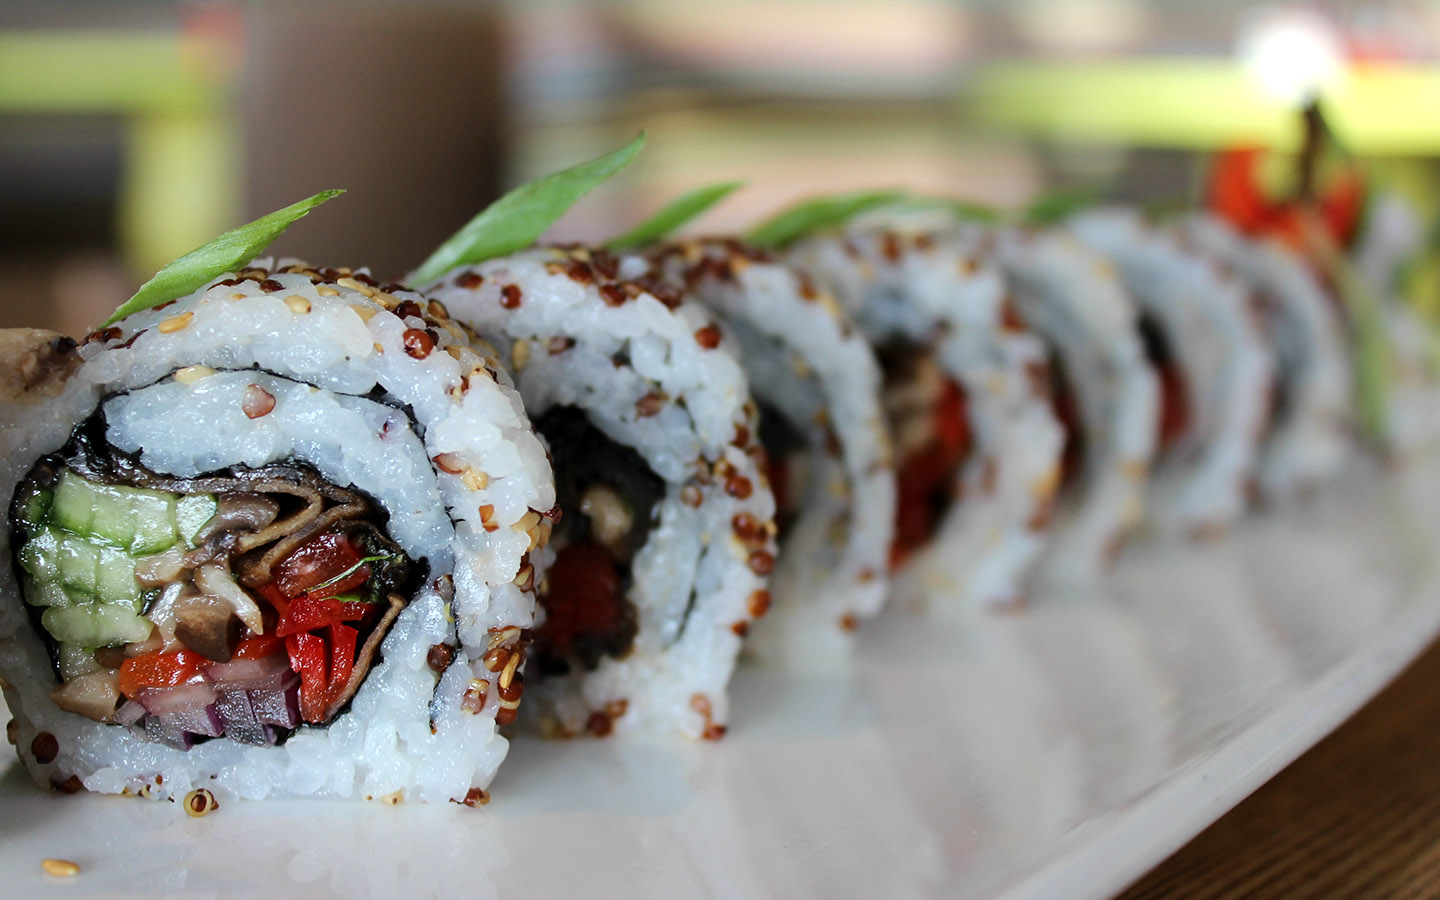 The Tree Hugger roll from The Cowfish in Universal CityWalk.